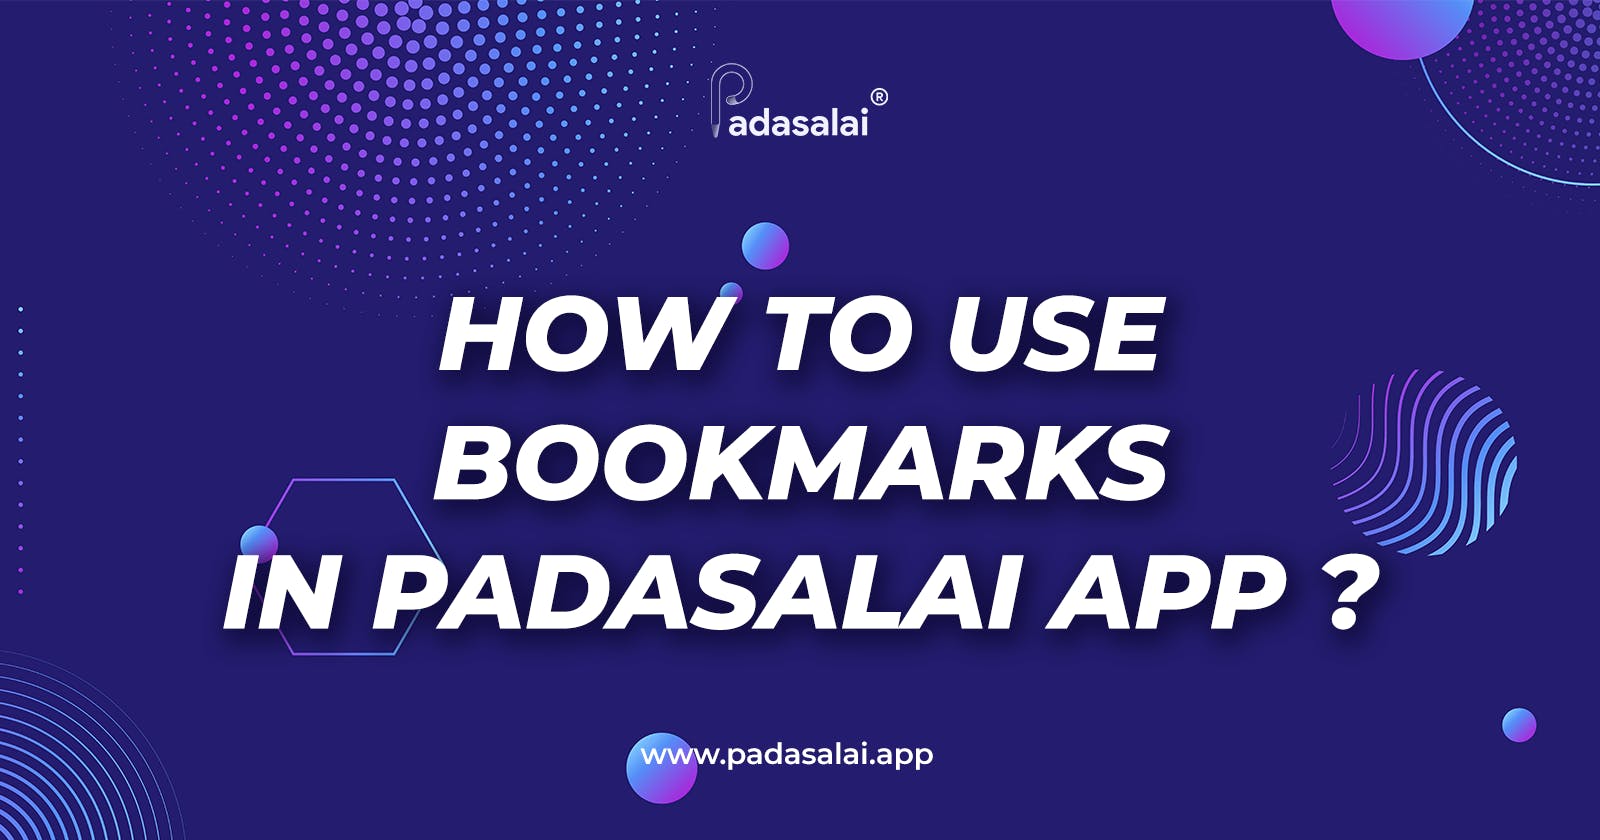 How to Use Bookmarks in Padasalai App?